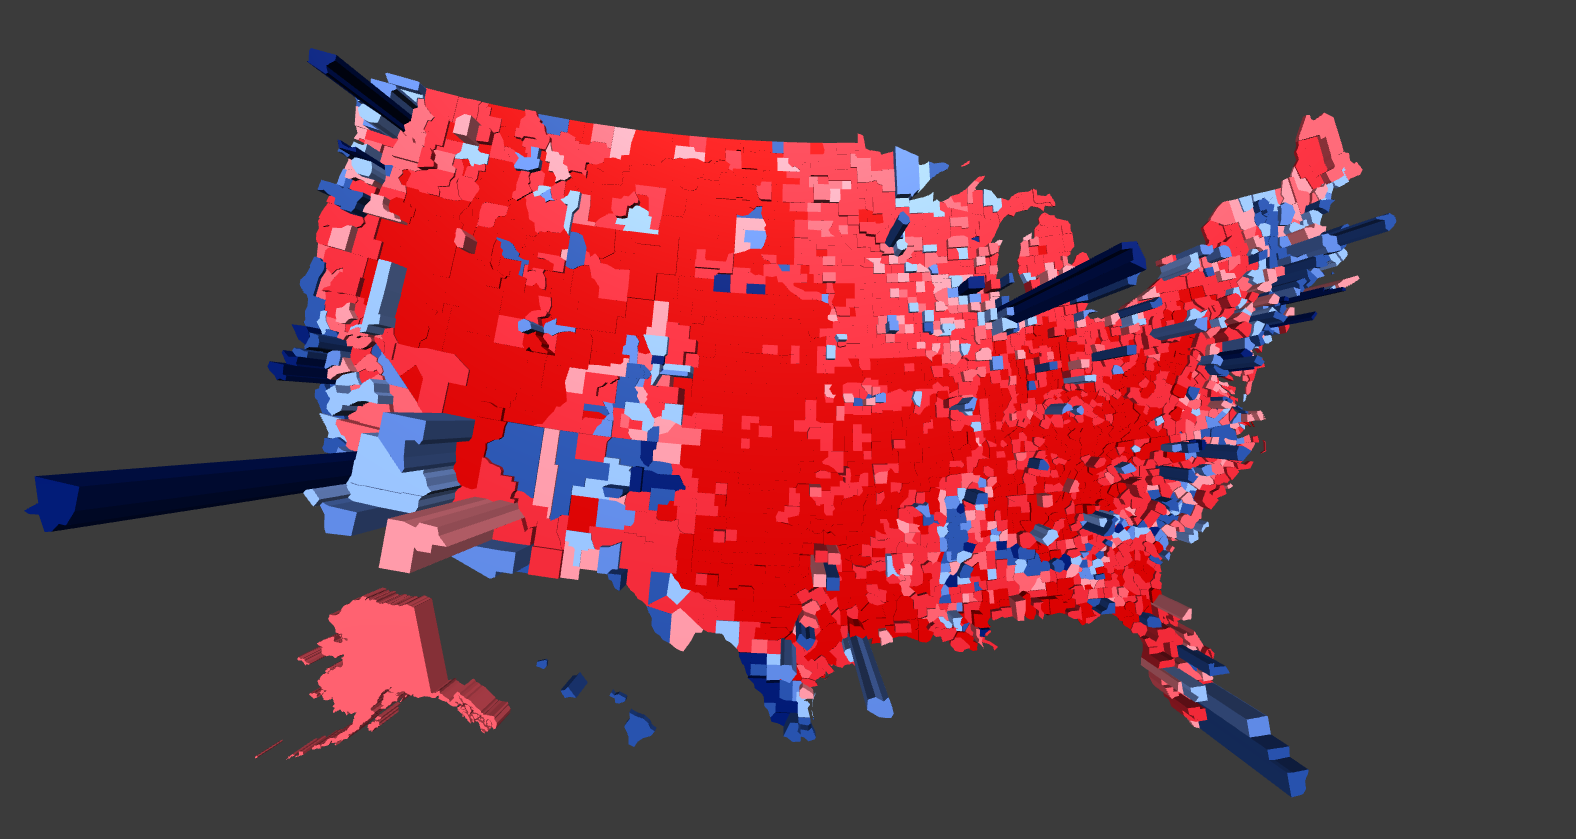 2017-09-04 18_26_10-Election 2016 County-Level Results, Mapped in 3D - Blueshift.png